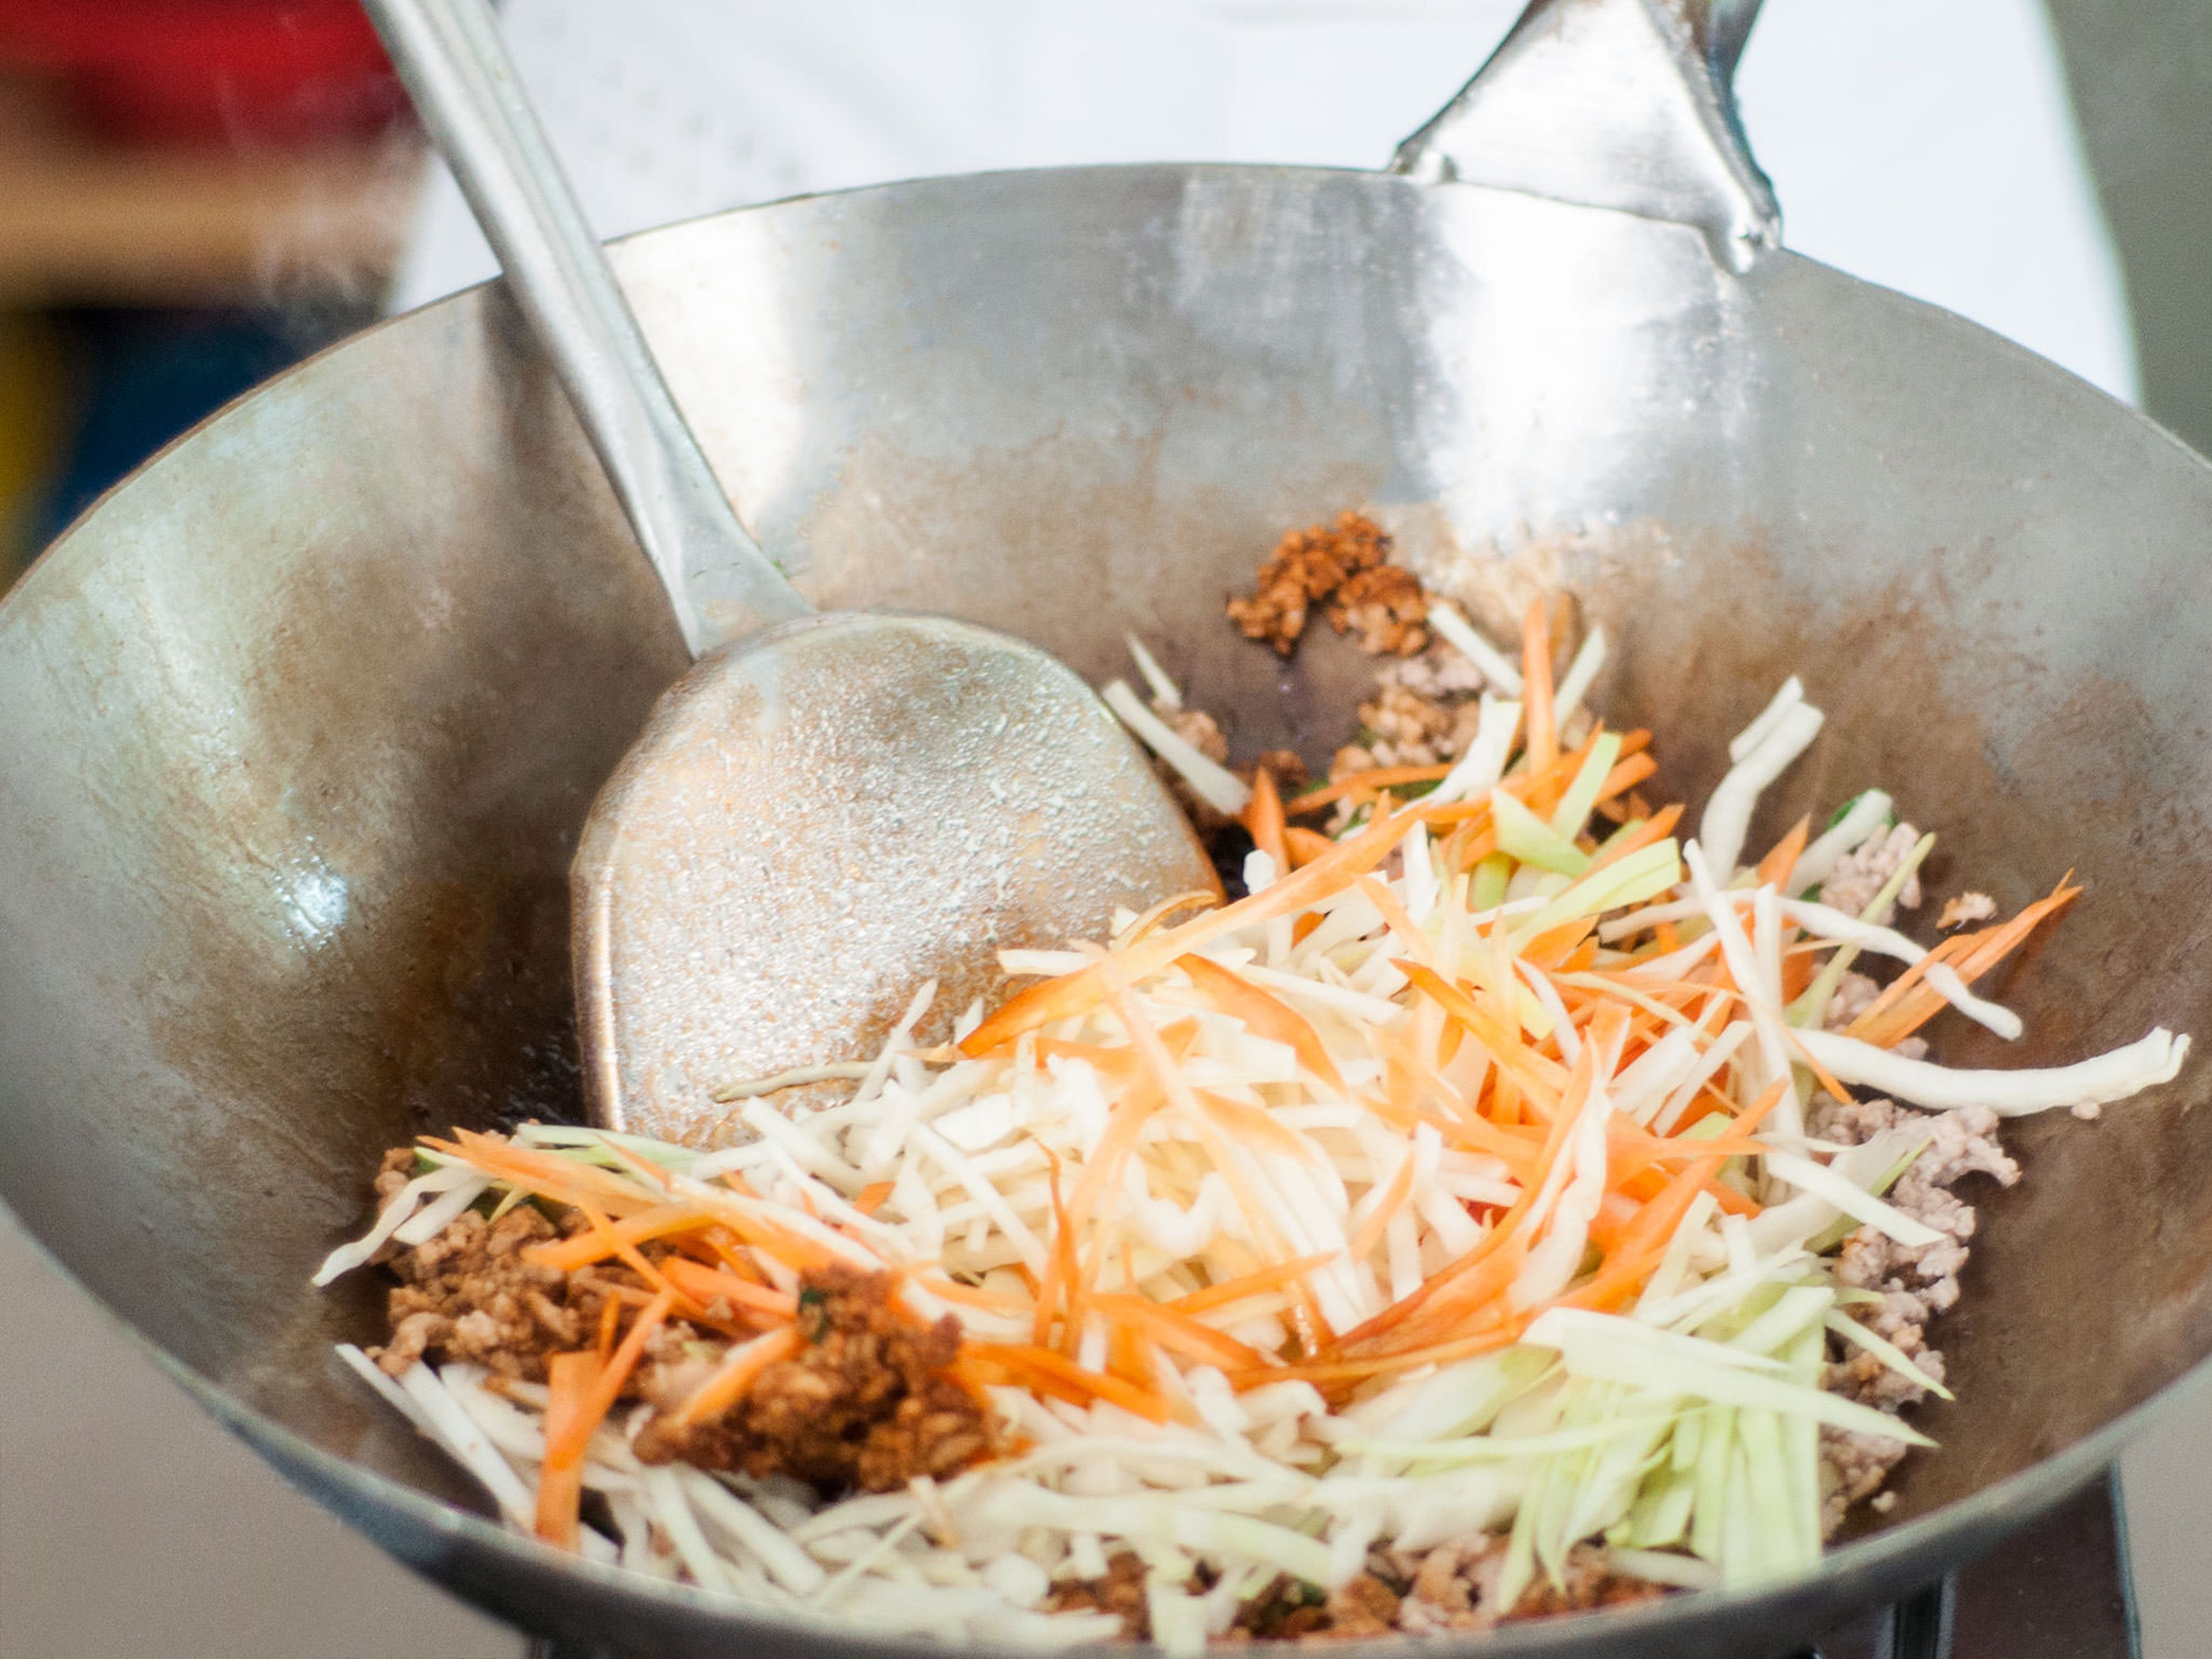 Add oil to a wok and fry ground pork for approx. 2 – 3 min. until browned. Add carrots and white cabbage and cook on low heat until softened for approx. 6 – 7 min. . Add sliced ginger, garlic, and green onions.  Season with five spice powder, salt, pepper, and dark soy sauce to taste.